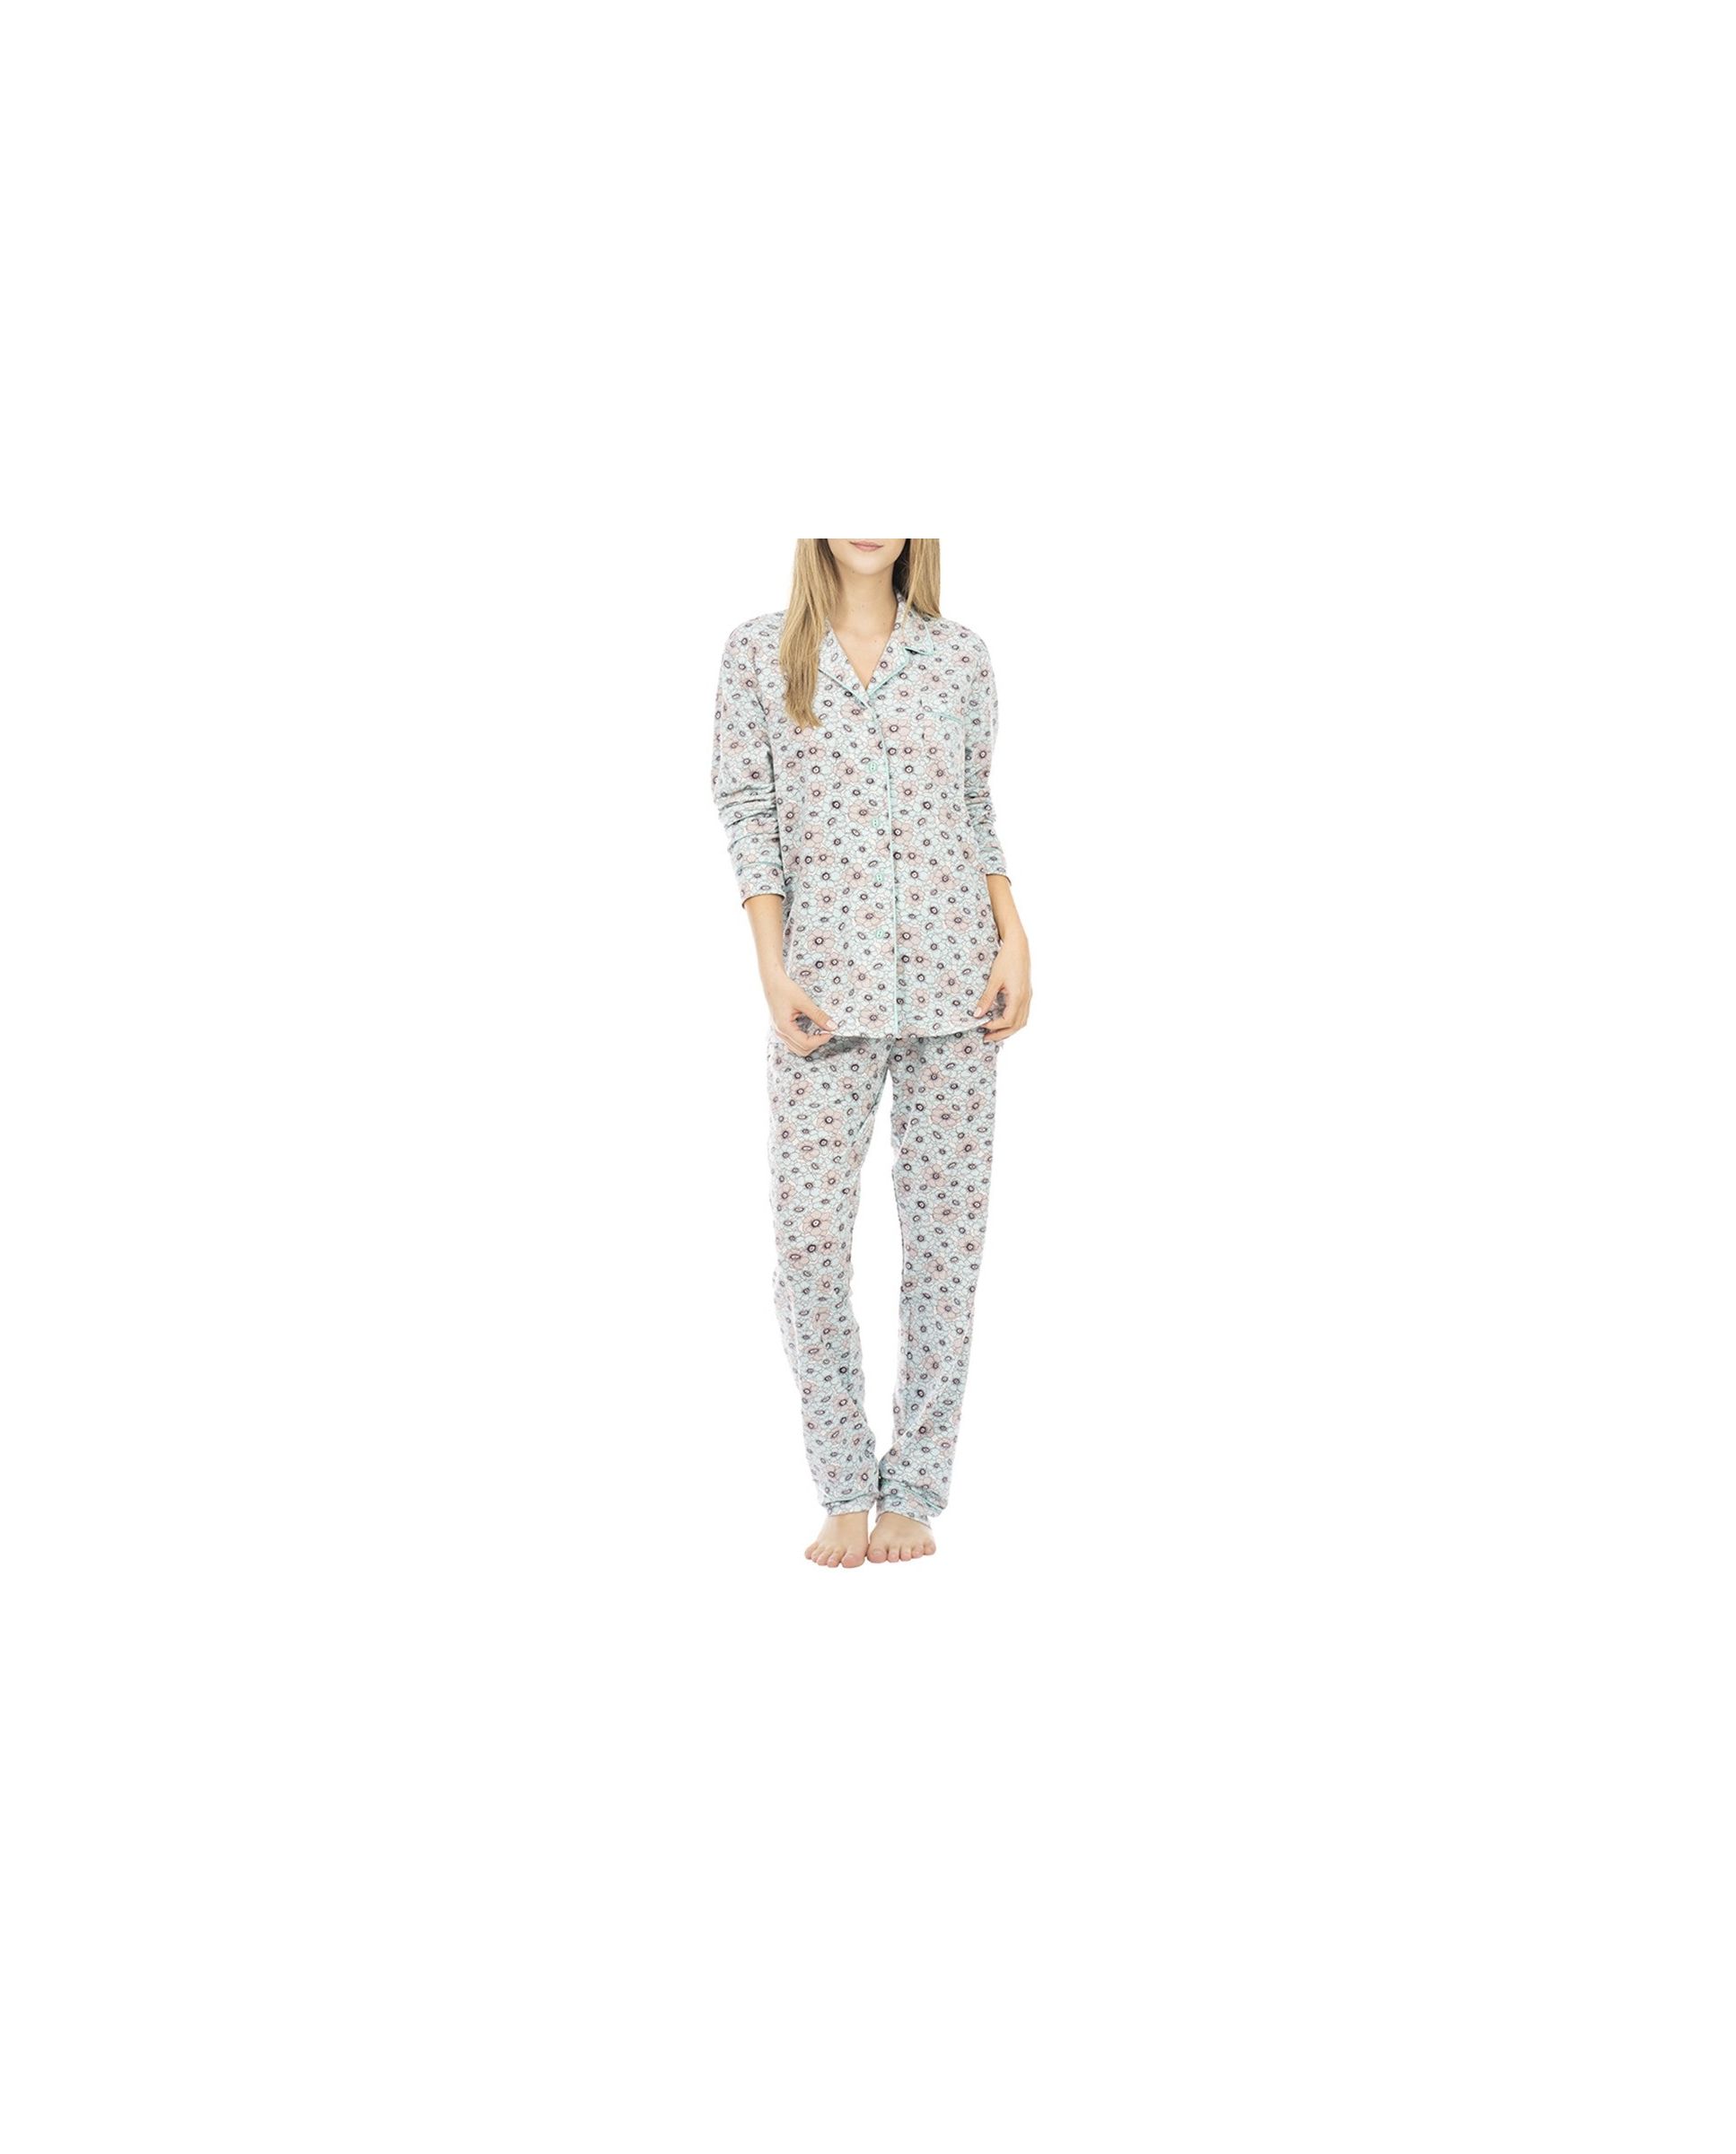 Turquoise floral open two-piece winter pyjamas